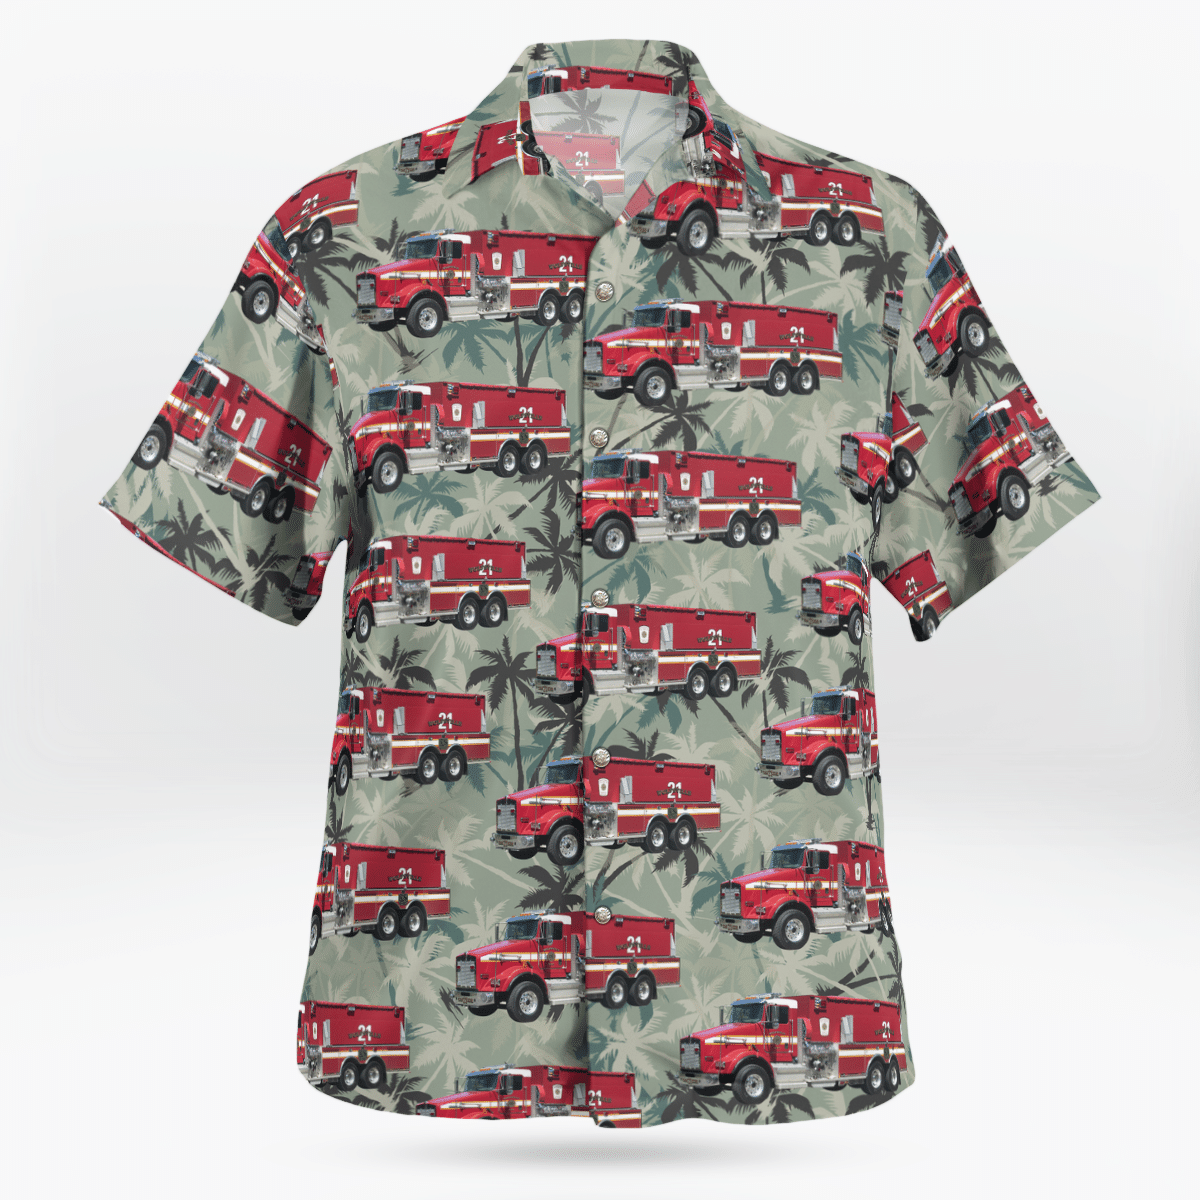 Hawaiian shirts never go out of style 143